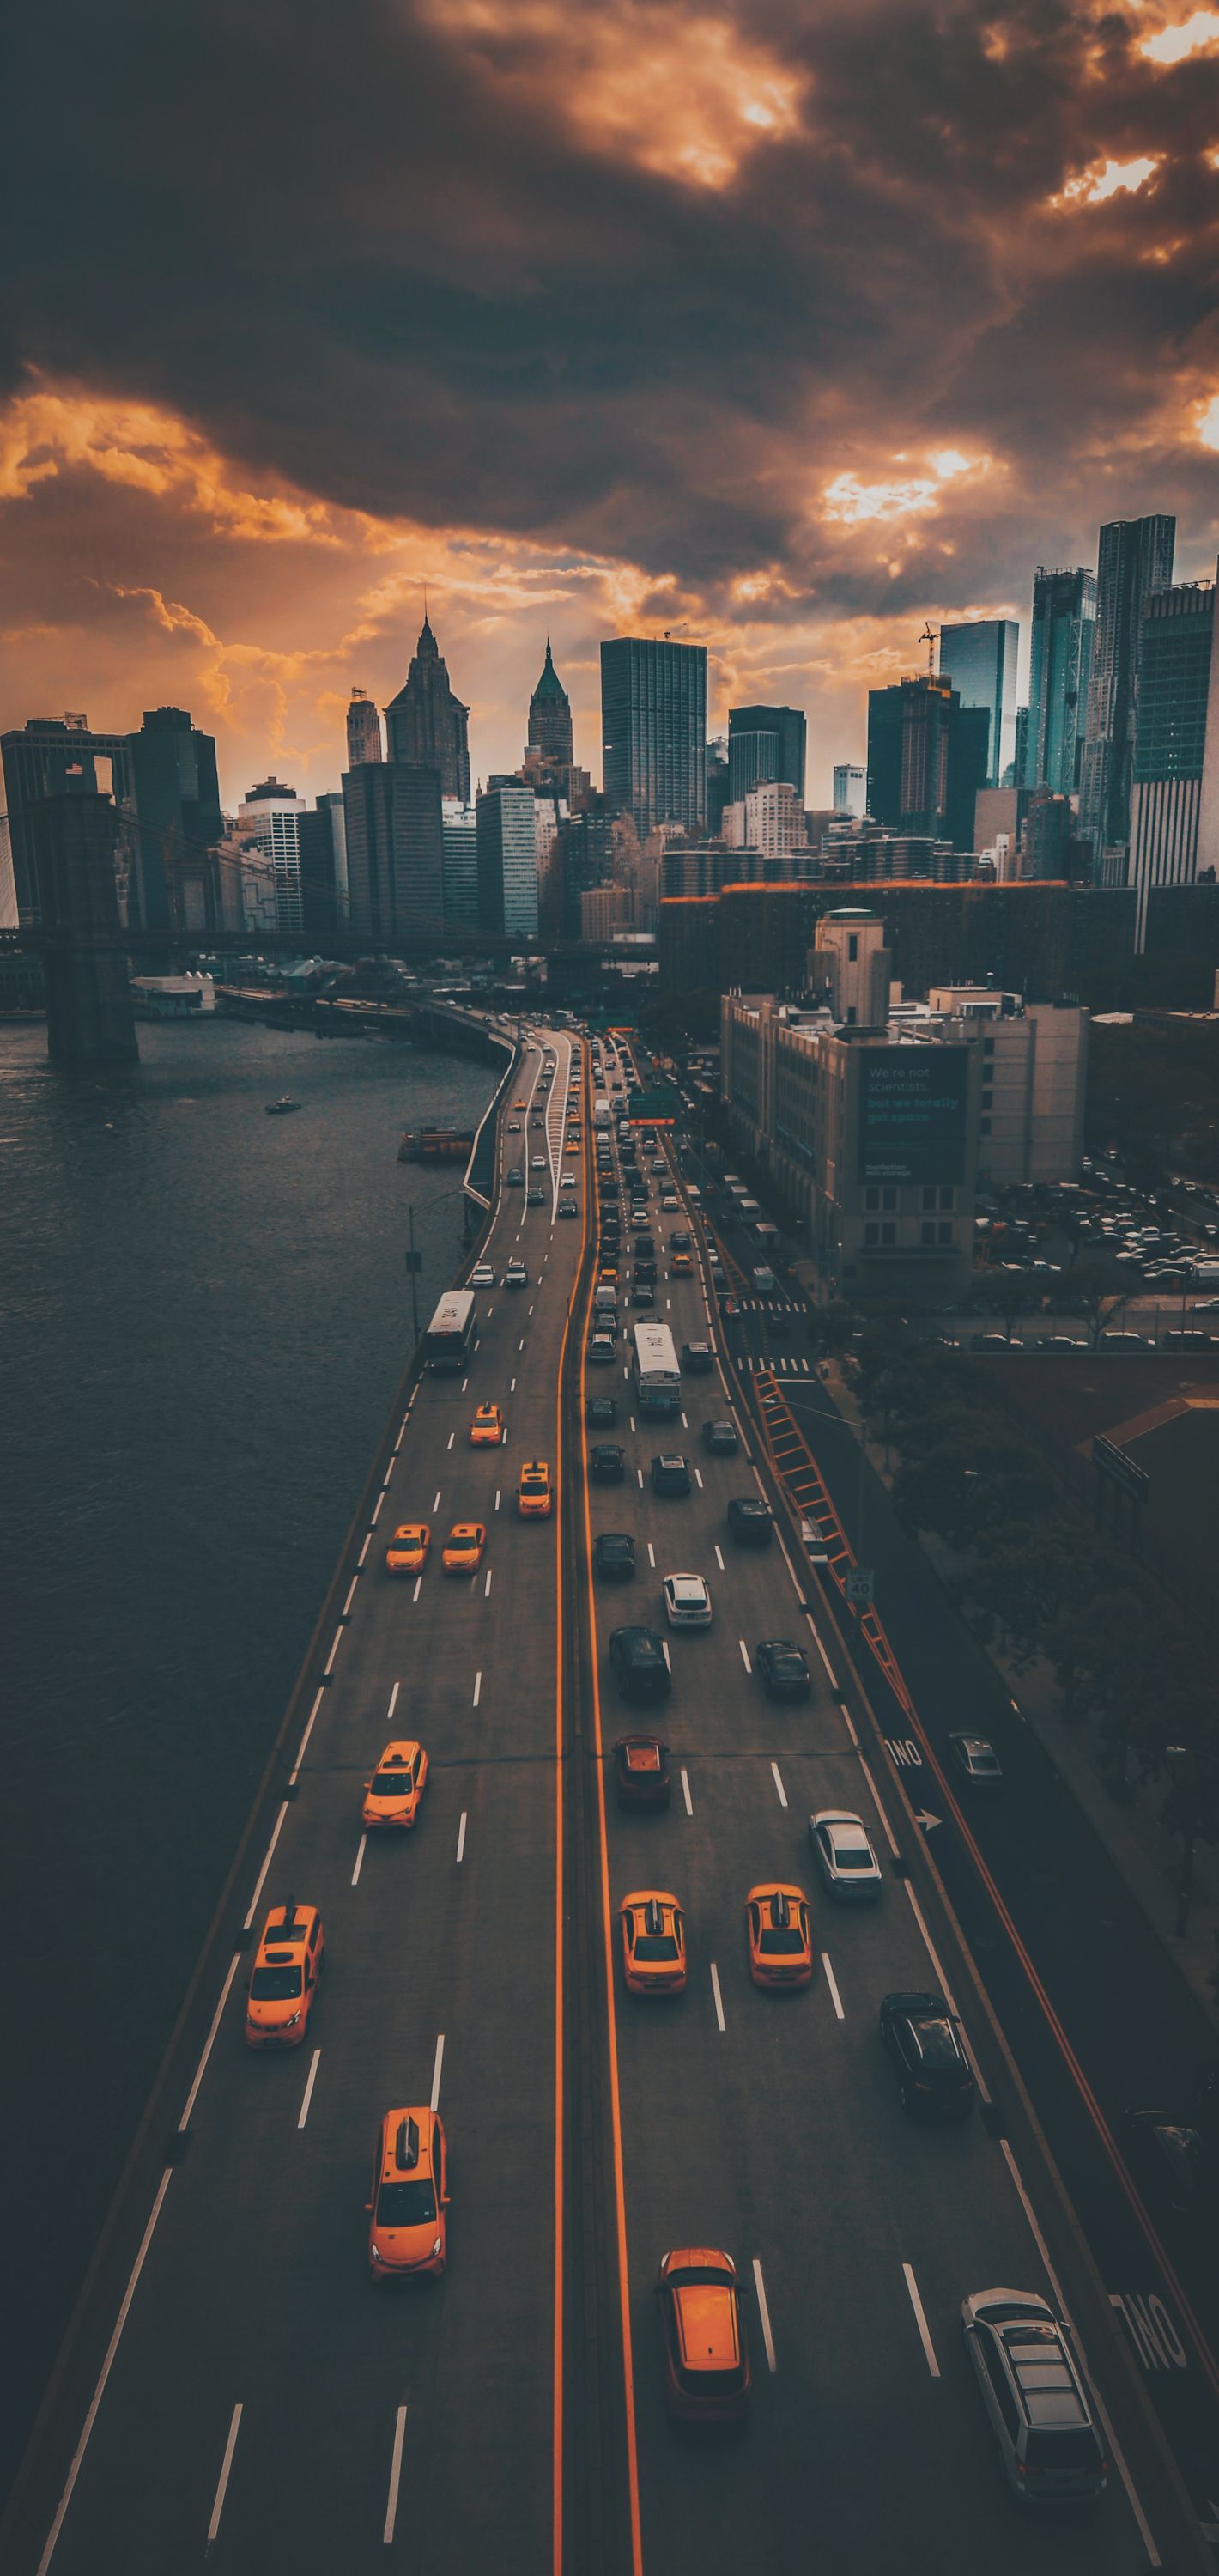 Wallpaper New York City Aesthetic, New York, Building, Cloud, Cars, Background Free Image